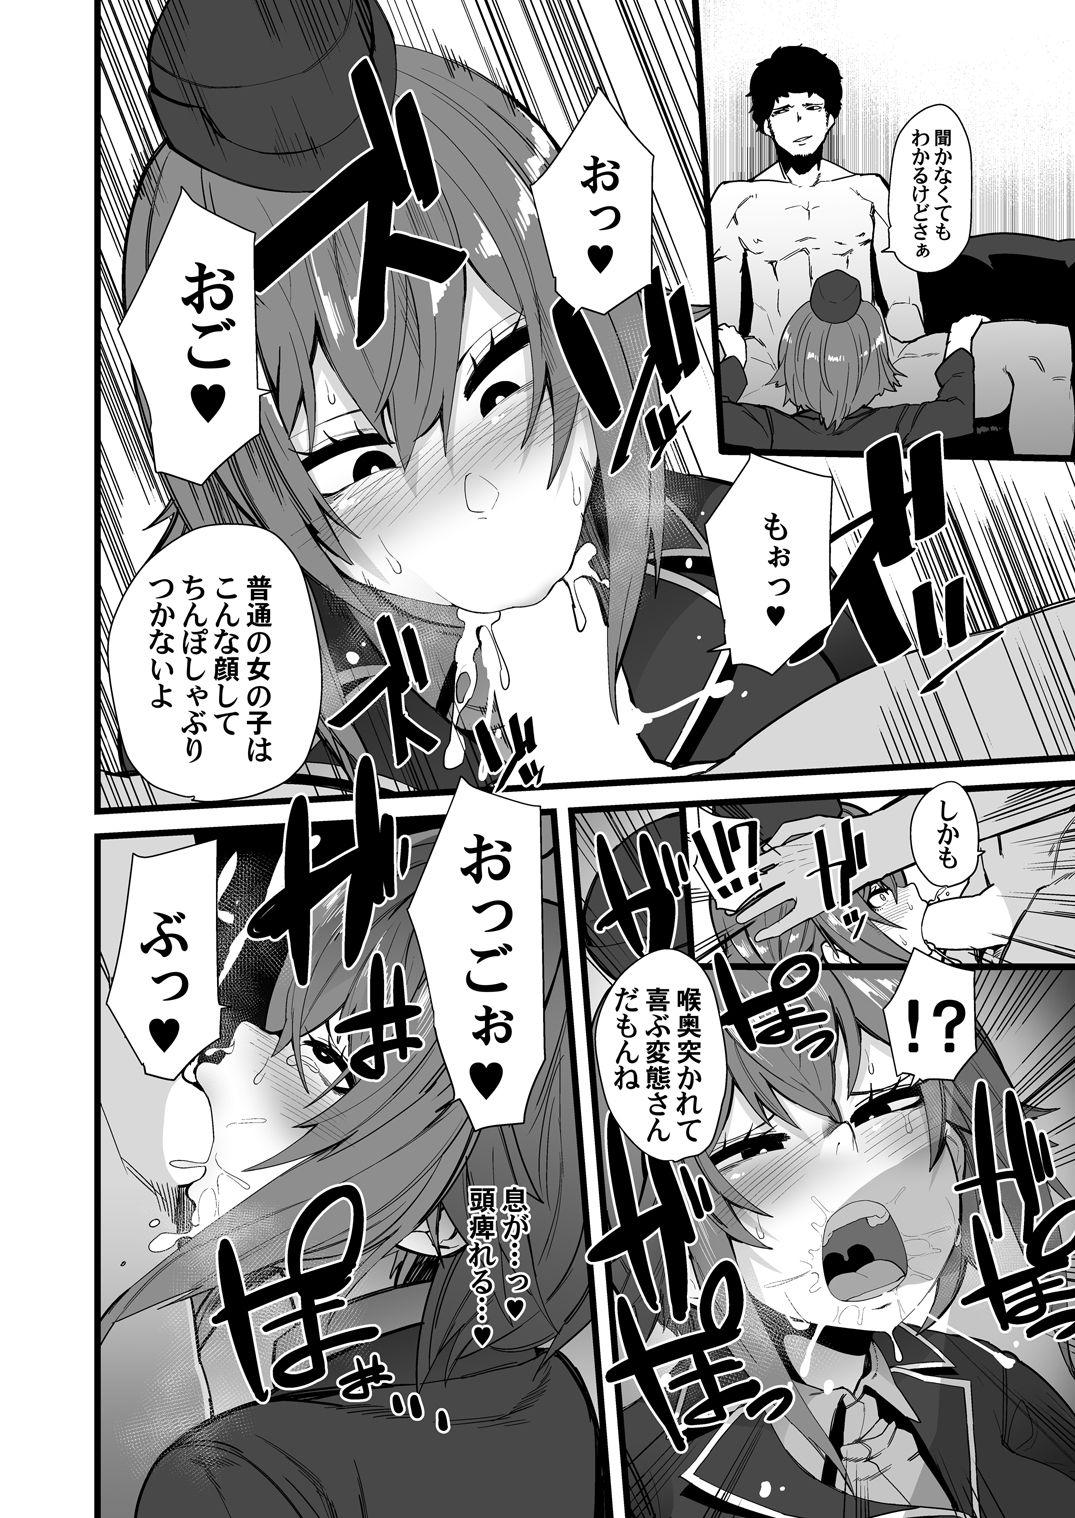 Soloboy BAD TRIP - Girls und panzer Pussy Eating - Page 5